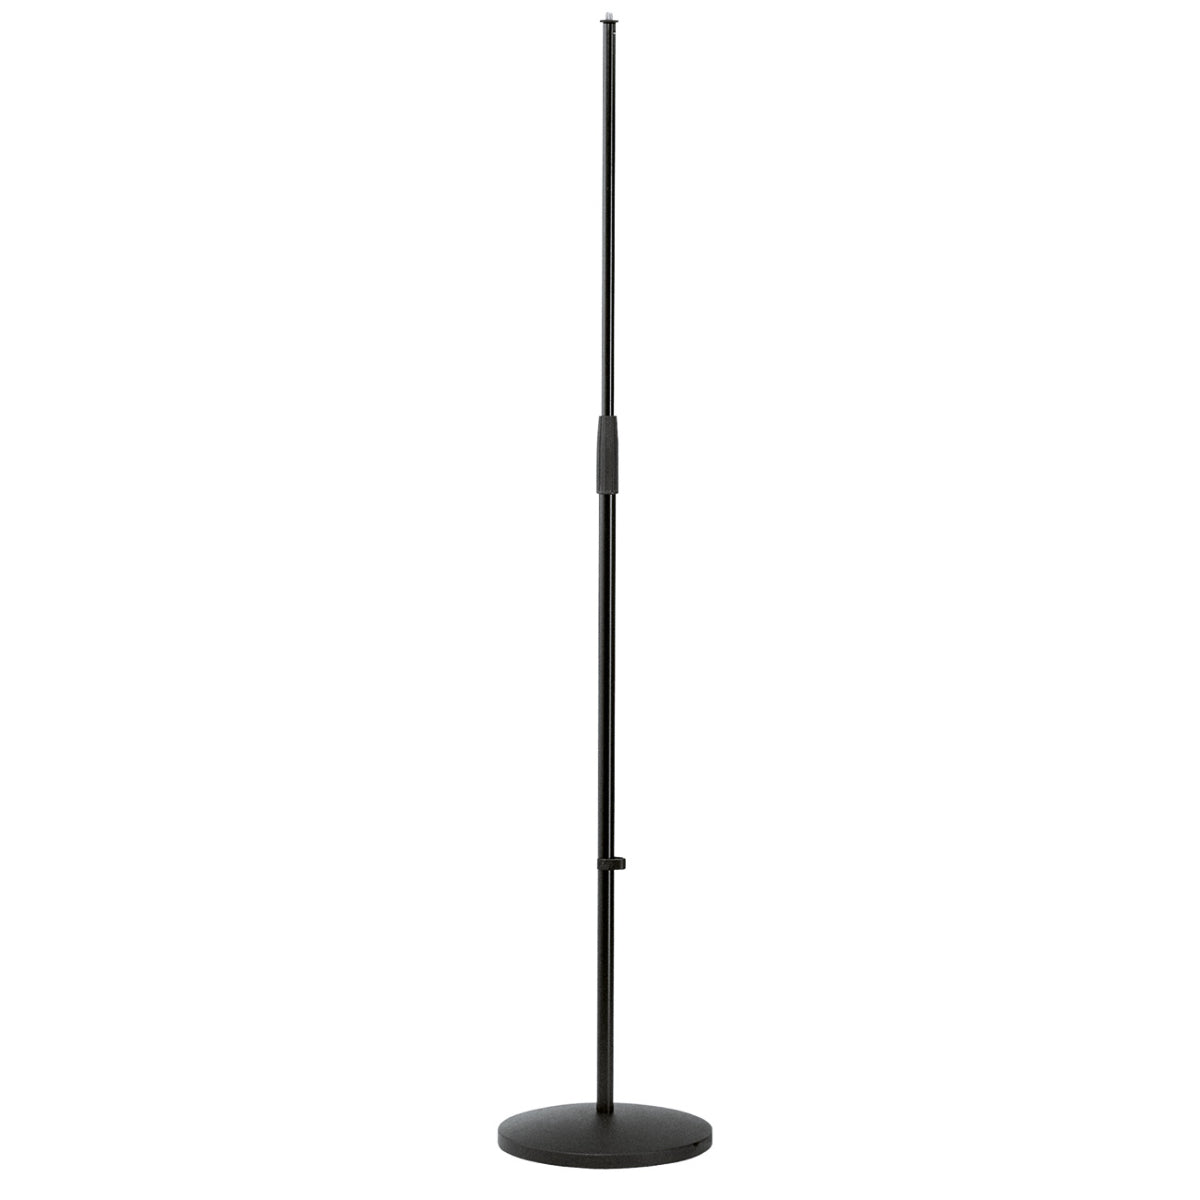 260-1 Microphone Stand, Round Base, Black Finish